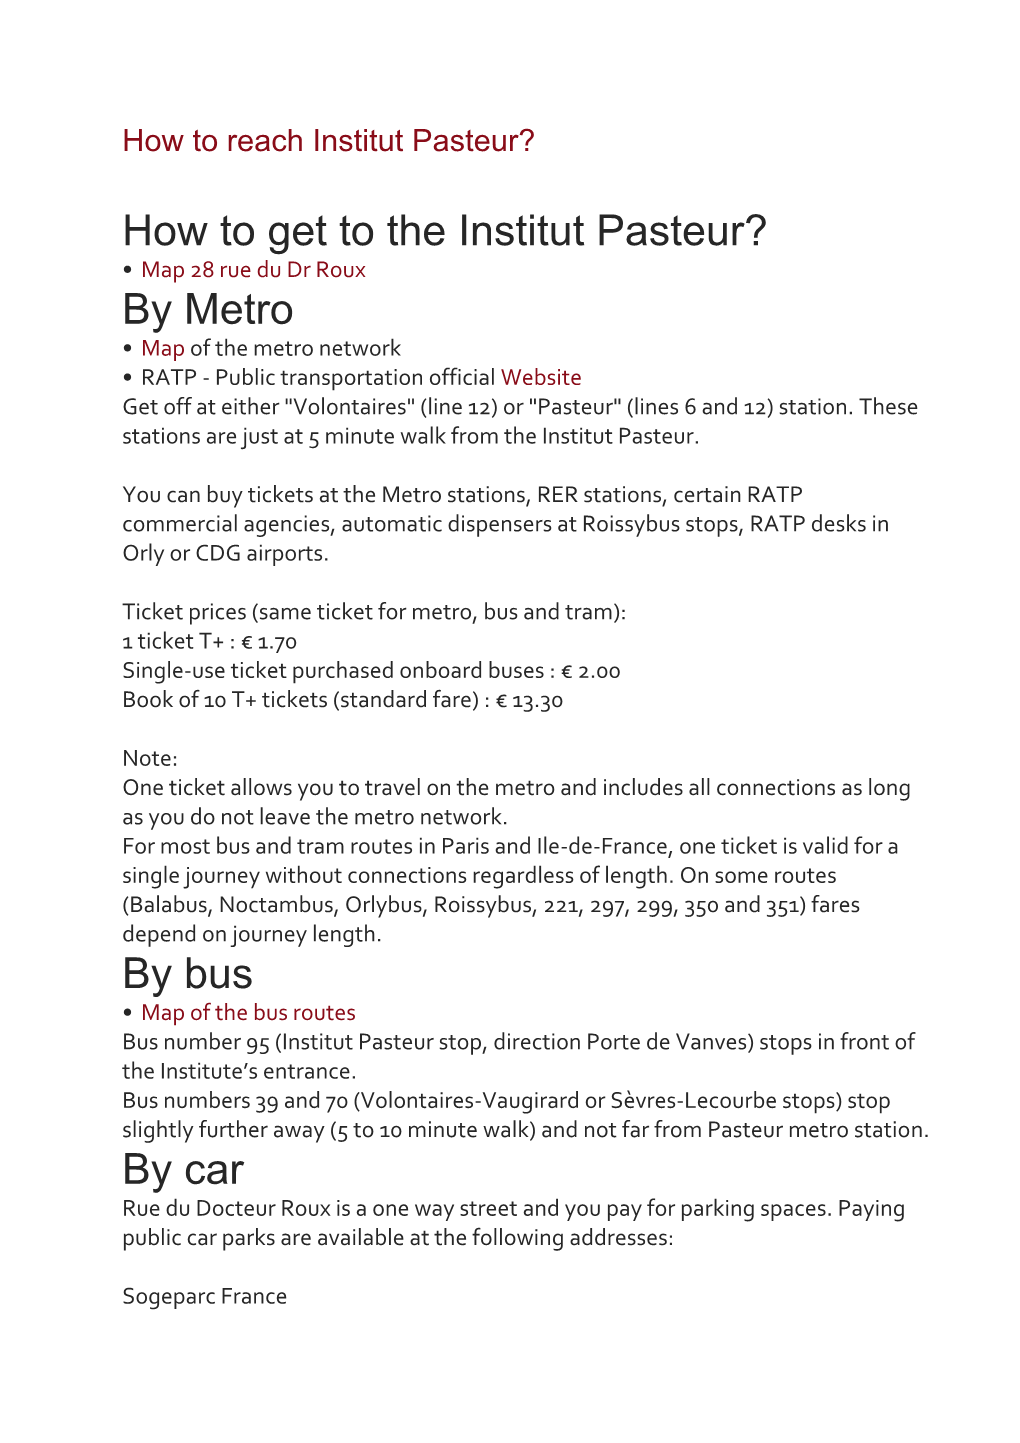 How to Get to the Institut Pasteur?